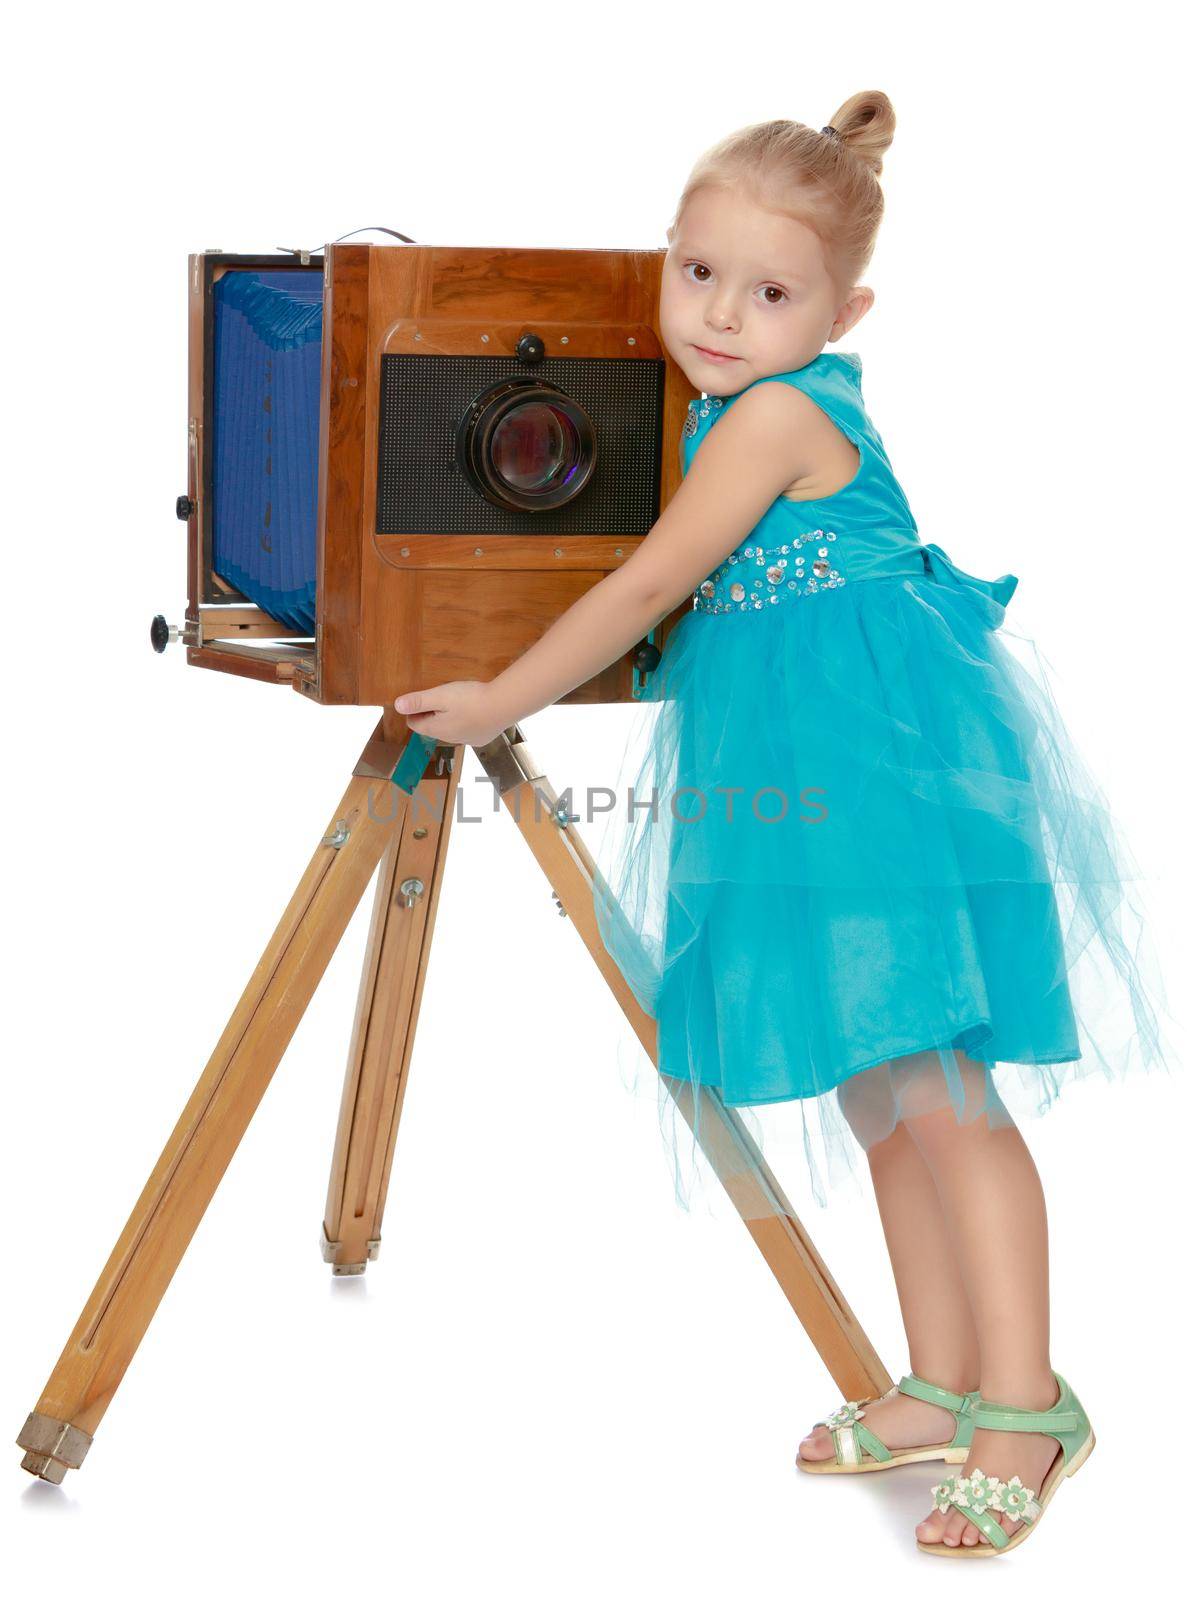 Cute little girl in blue elegant dress posing near antique wooden camera, wooden legs.Isolated on white background